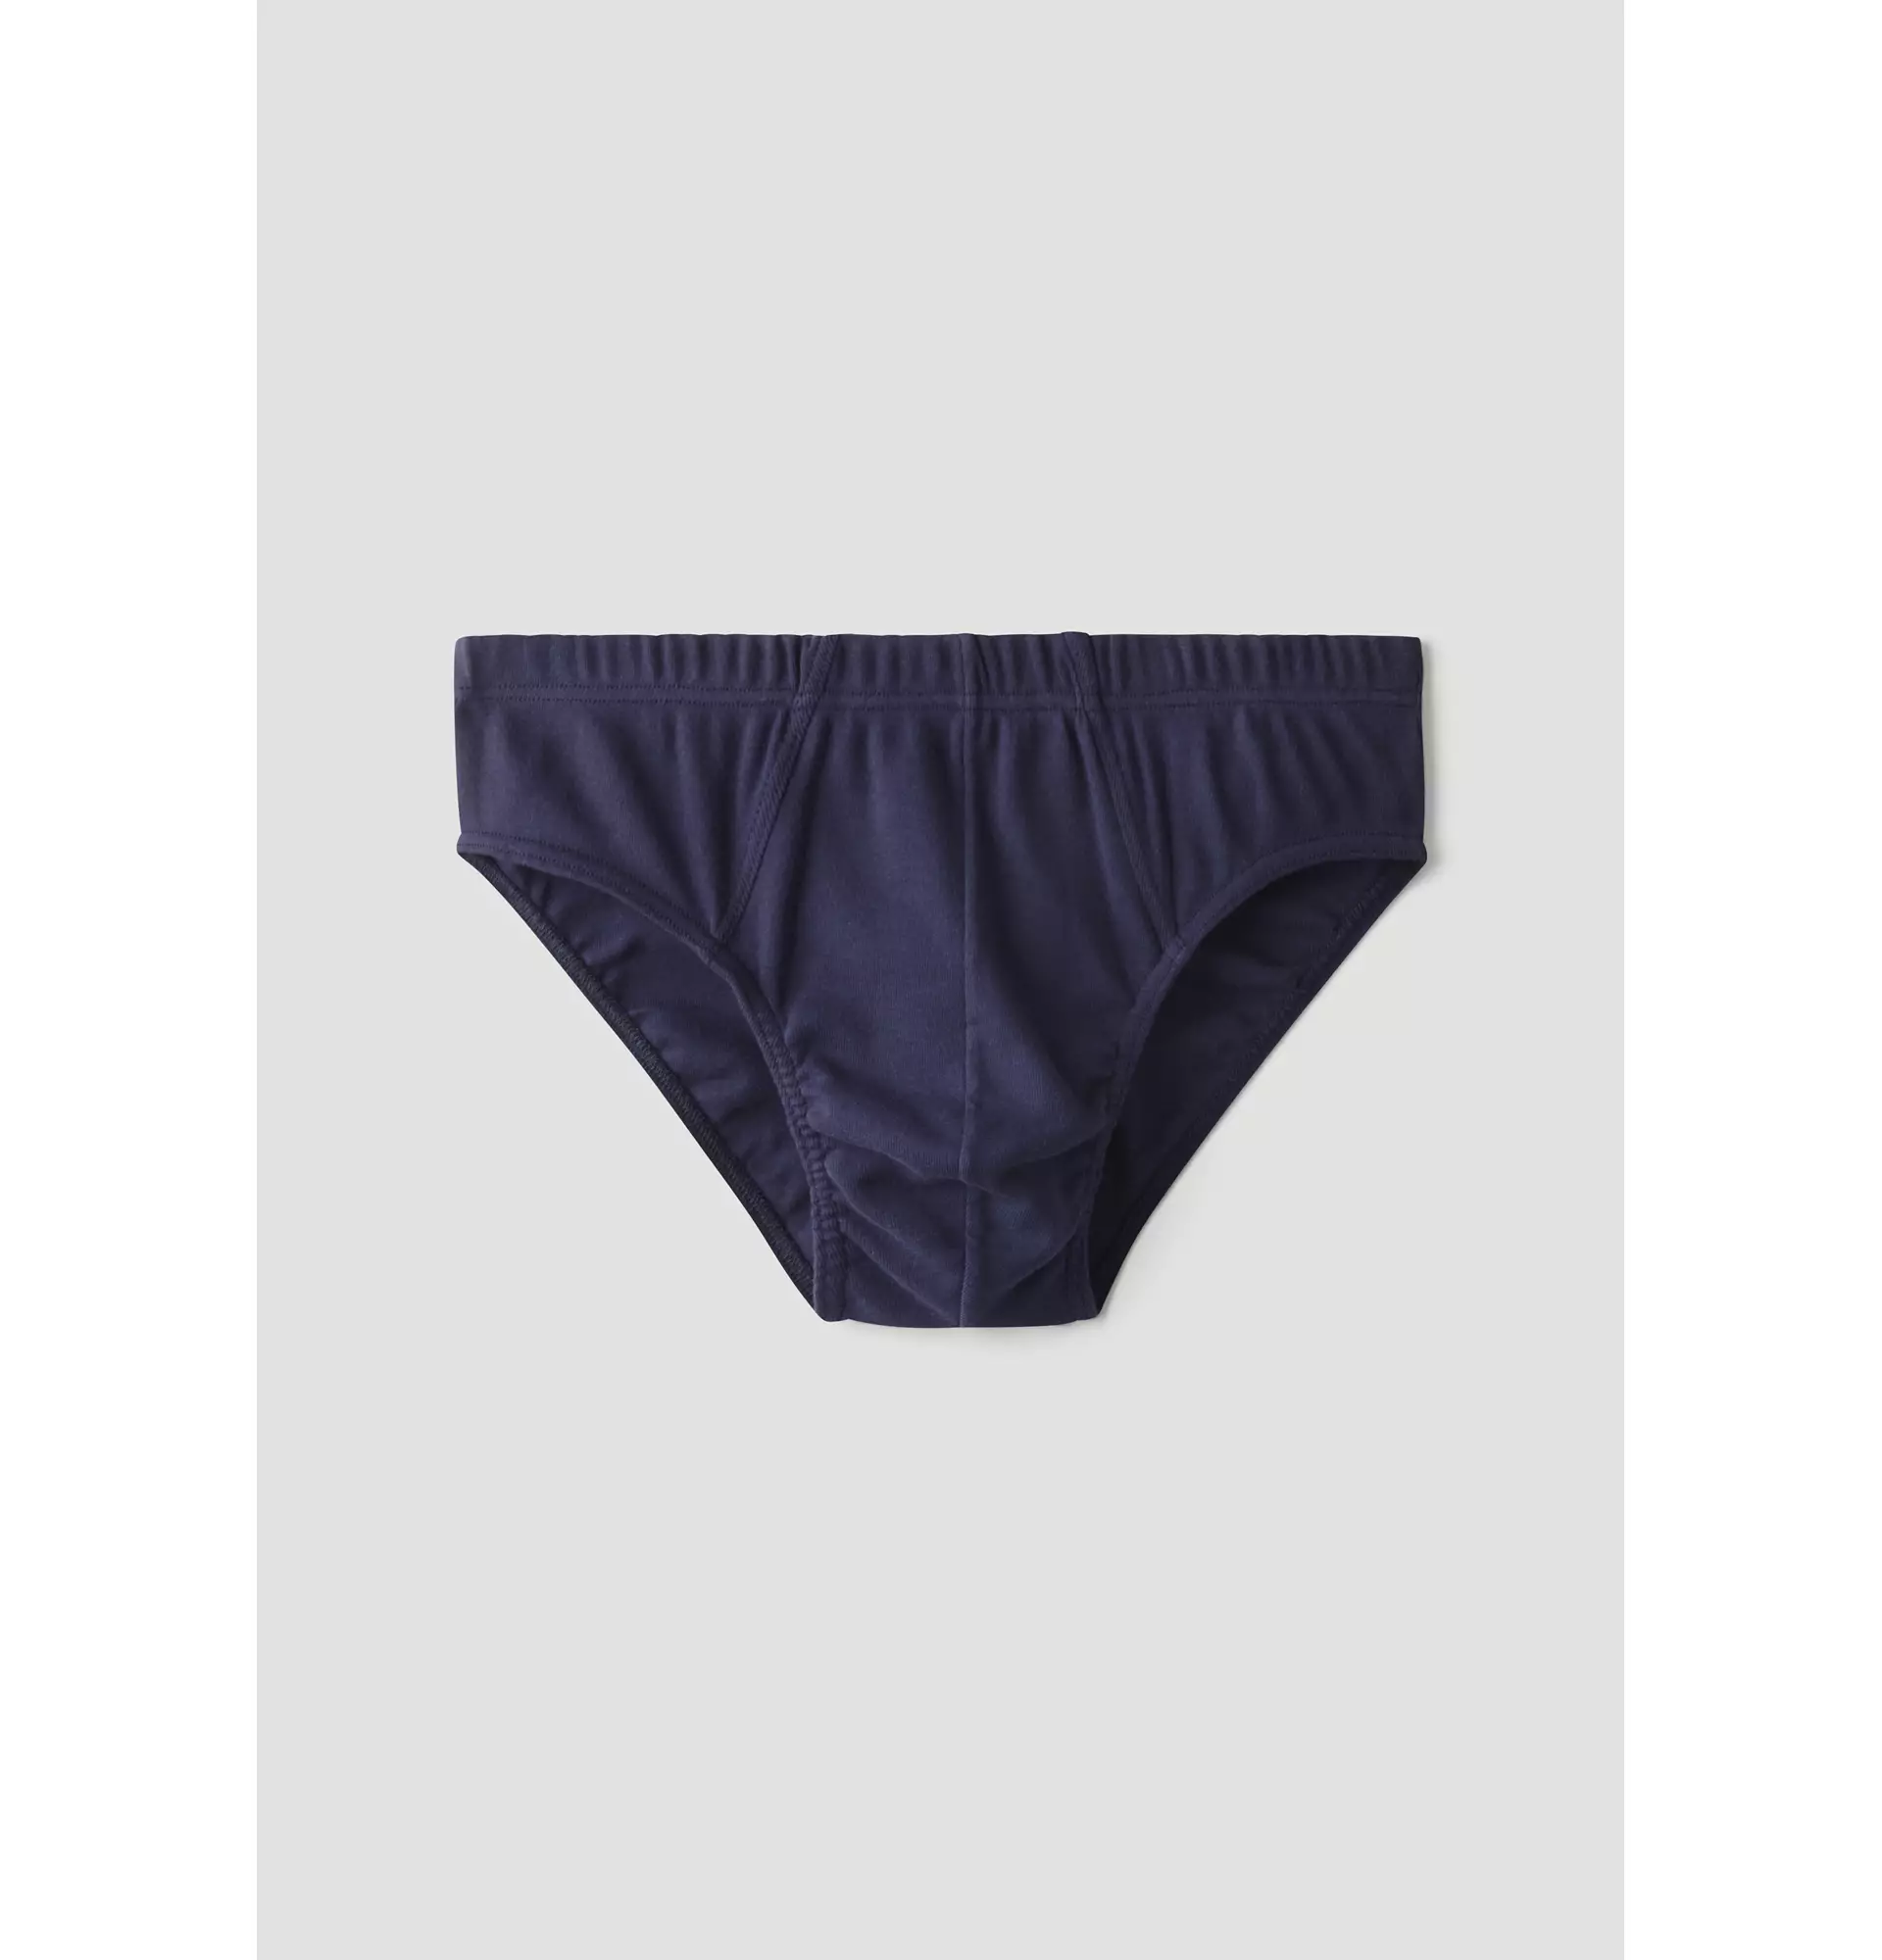 Daily Wear Panty Brief Organic Cotton High Selling Cheap Price Women at Rs  45/piece, Pure Cotton Panties For Women in New Delhi